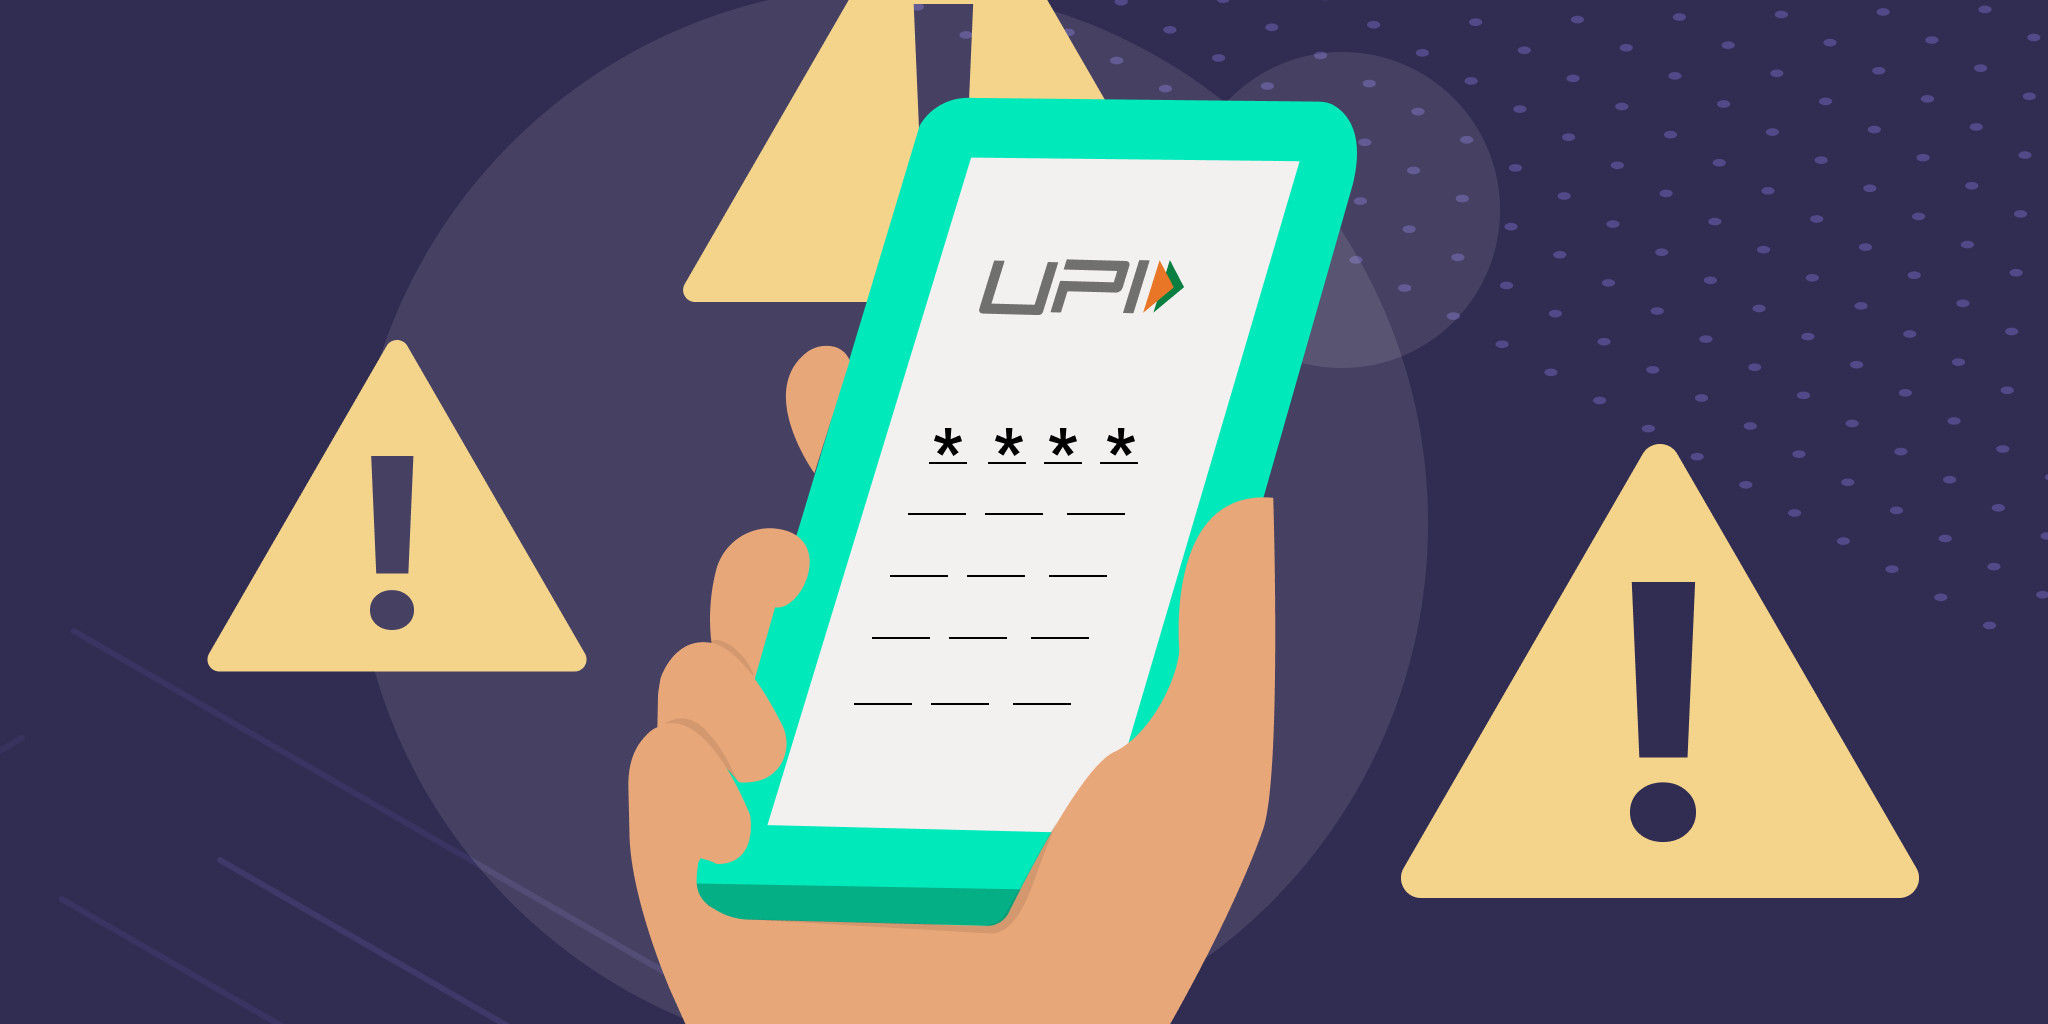 Mega Growth In UPI Frauds With Increasing Usage